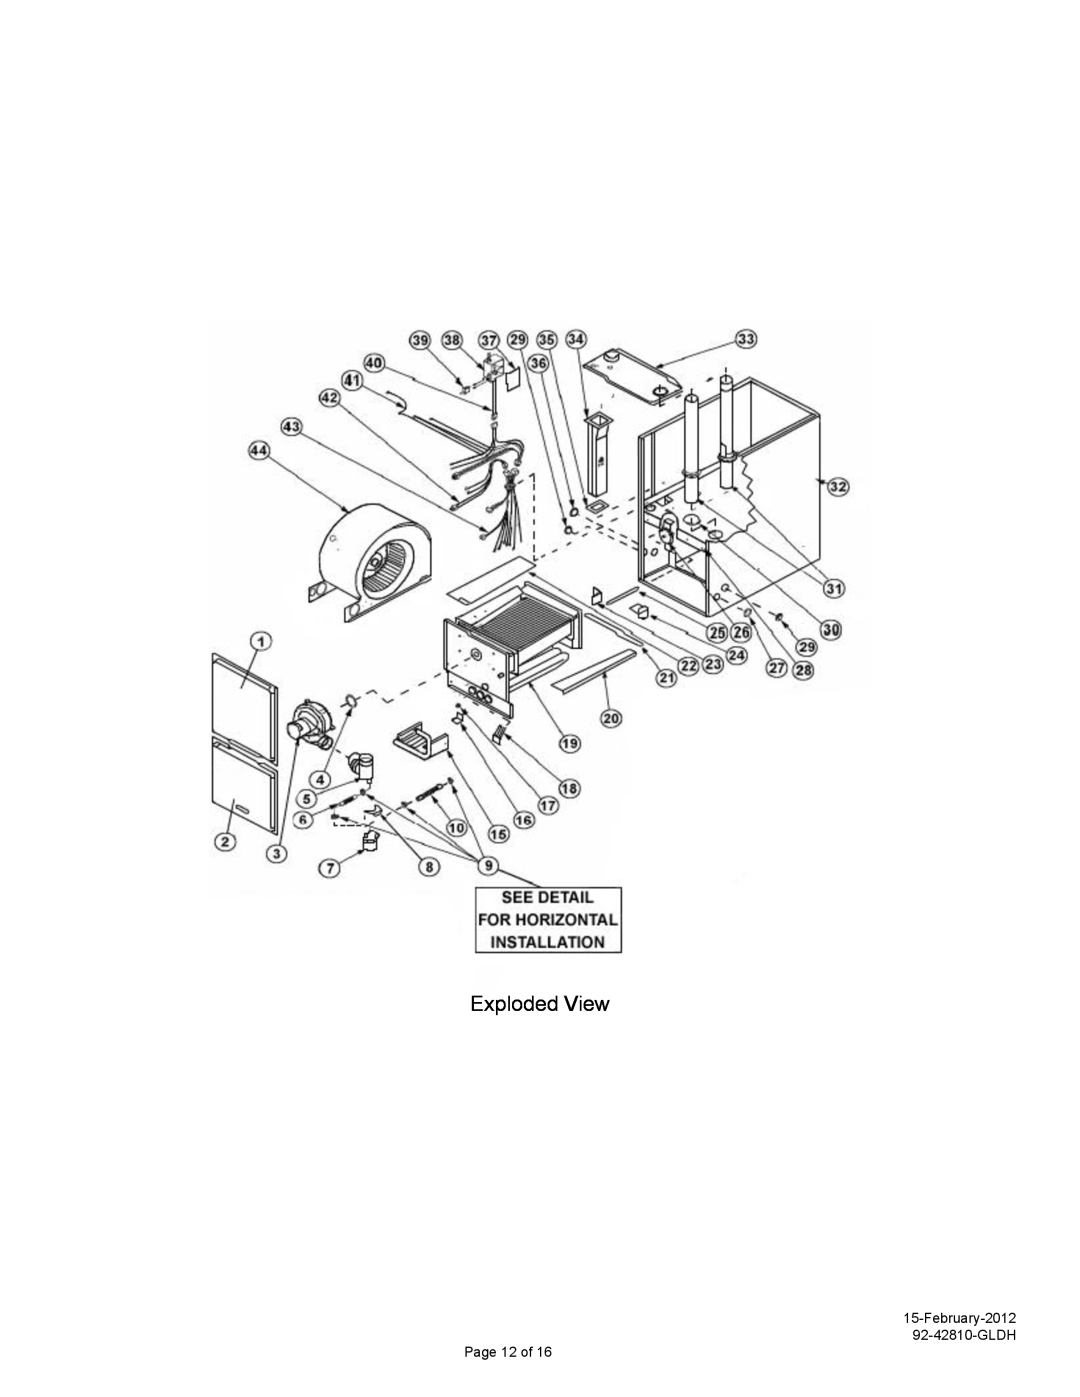 Heat Controller manual Exploded View, February-2012 92-42810-GLDH 